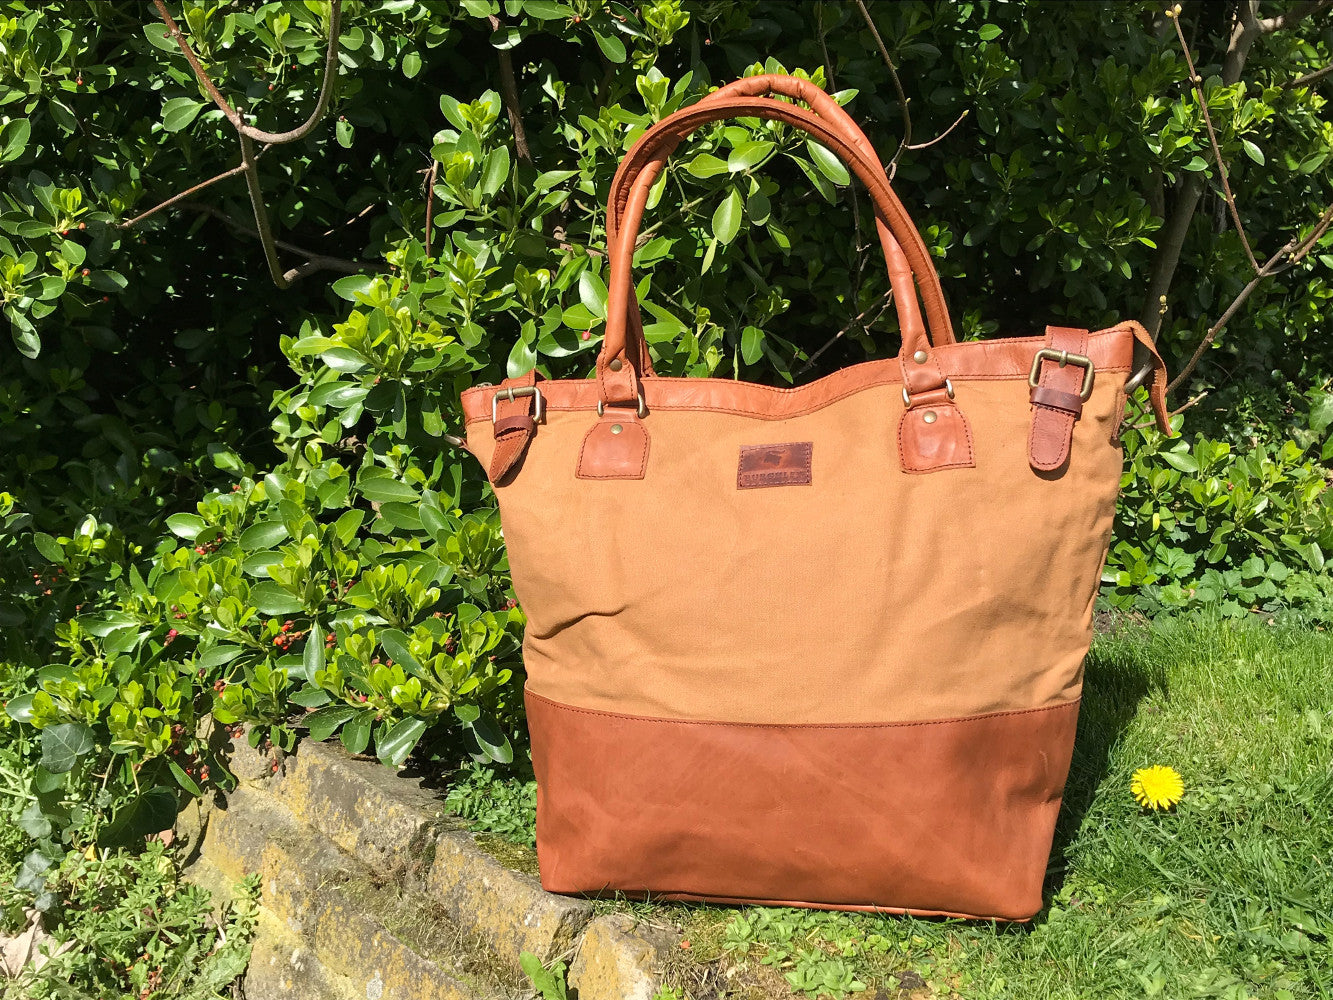 The Bingham.  A classic zipped tote bag by Burghley Bags.  Handmade from eco-friendly vegetable tanned leather and strong cotton canvas, with a leather shoulder strap.  Shown in classic tan.